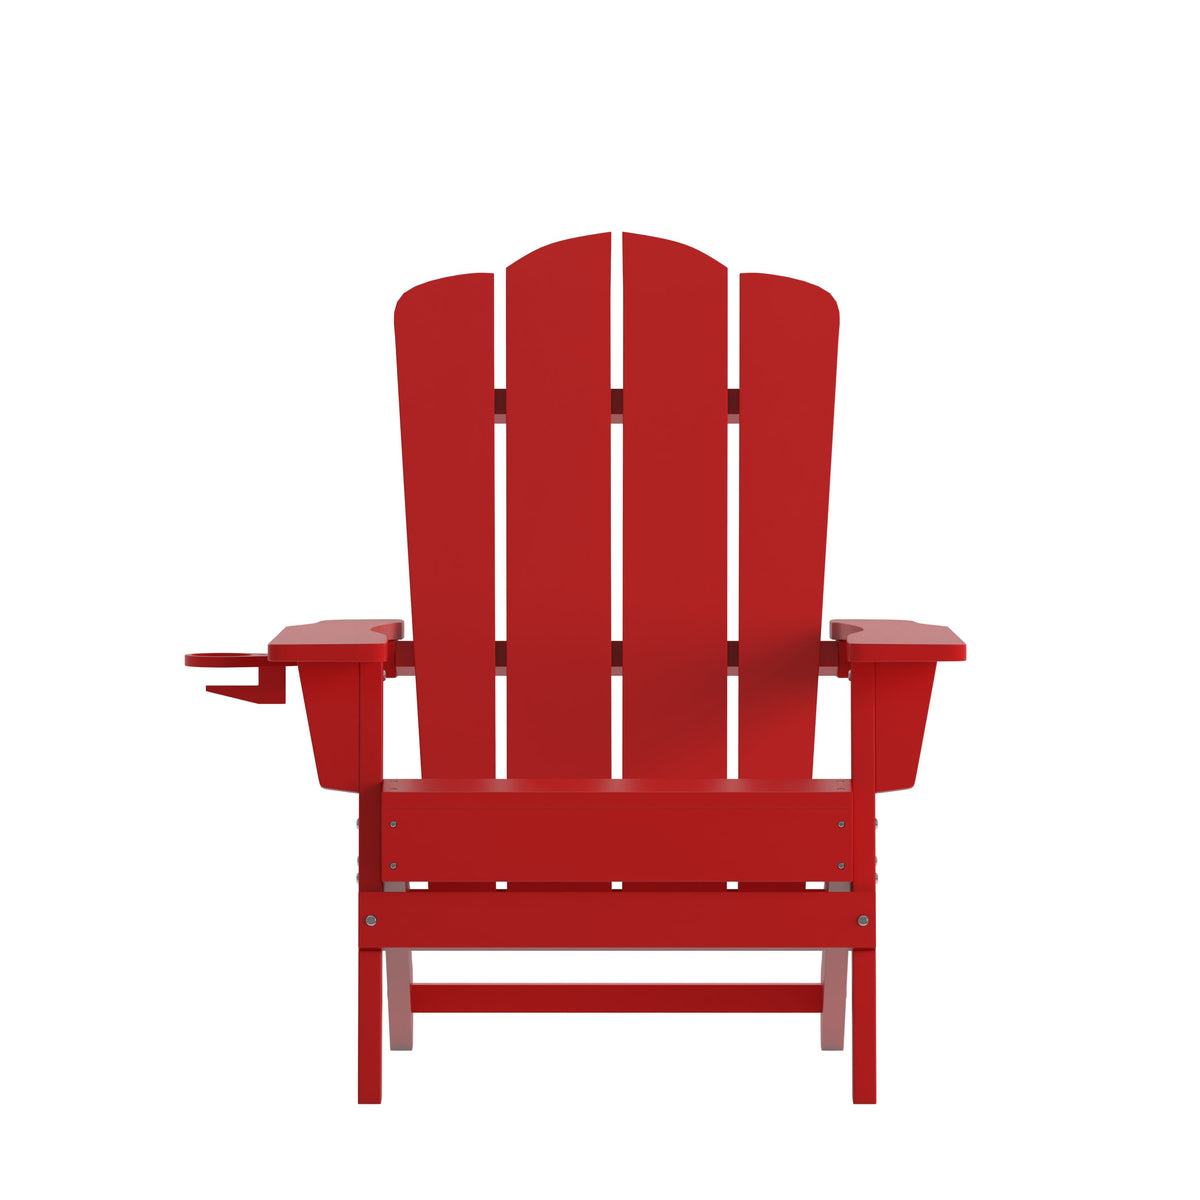 Red |#| Commercial Grade All-Weather Adirondack Chair with Swiveling Cupholder - Red